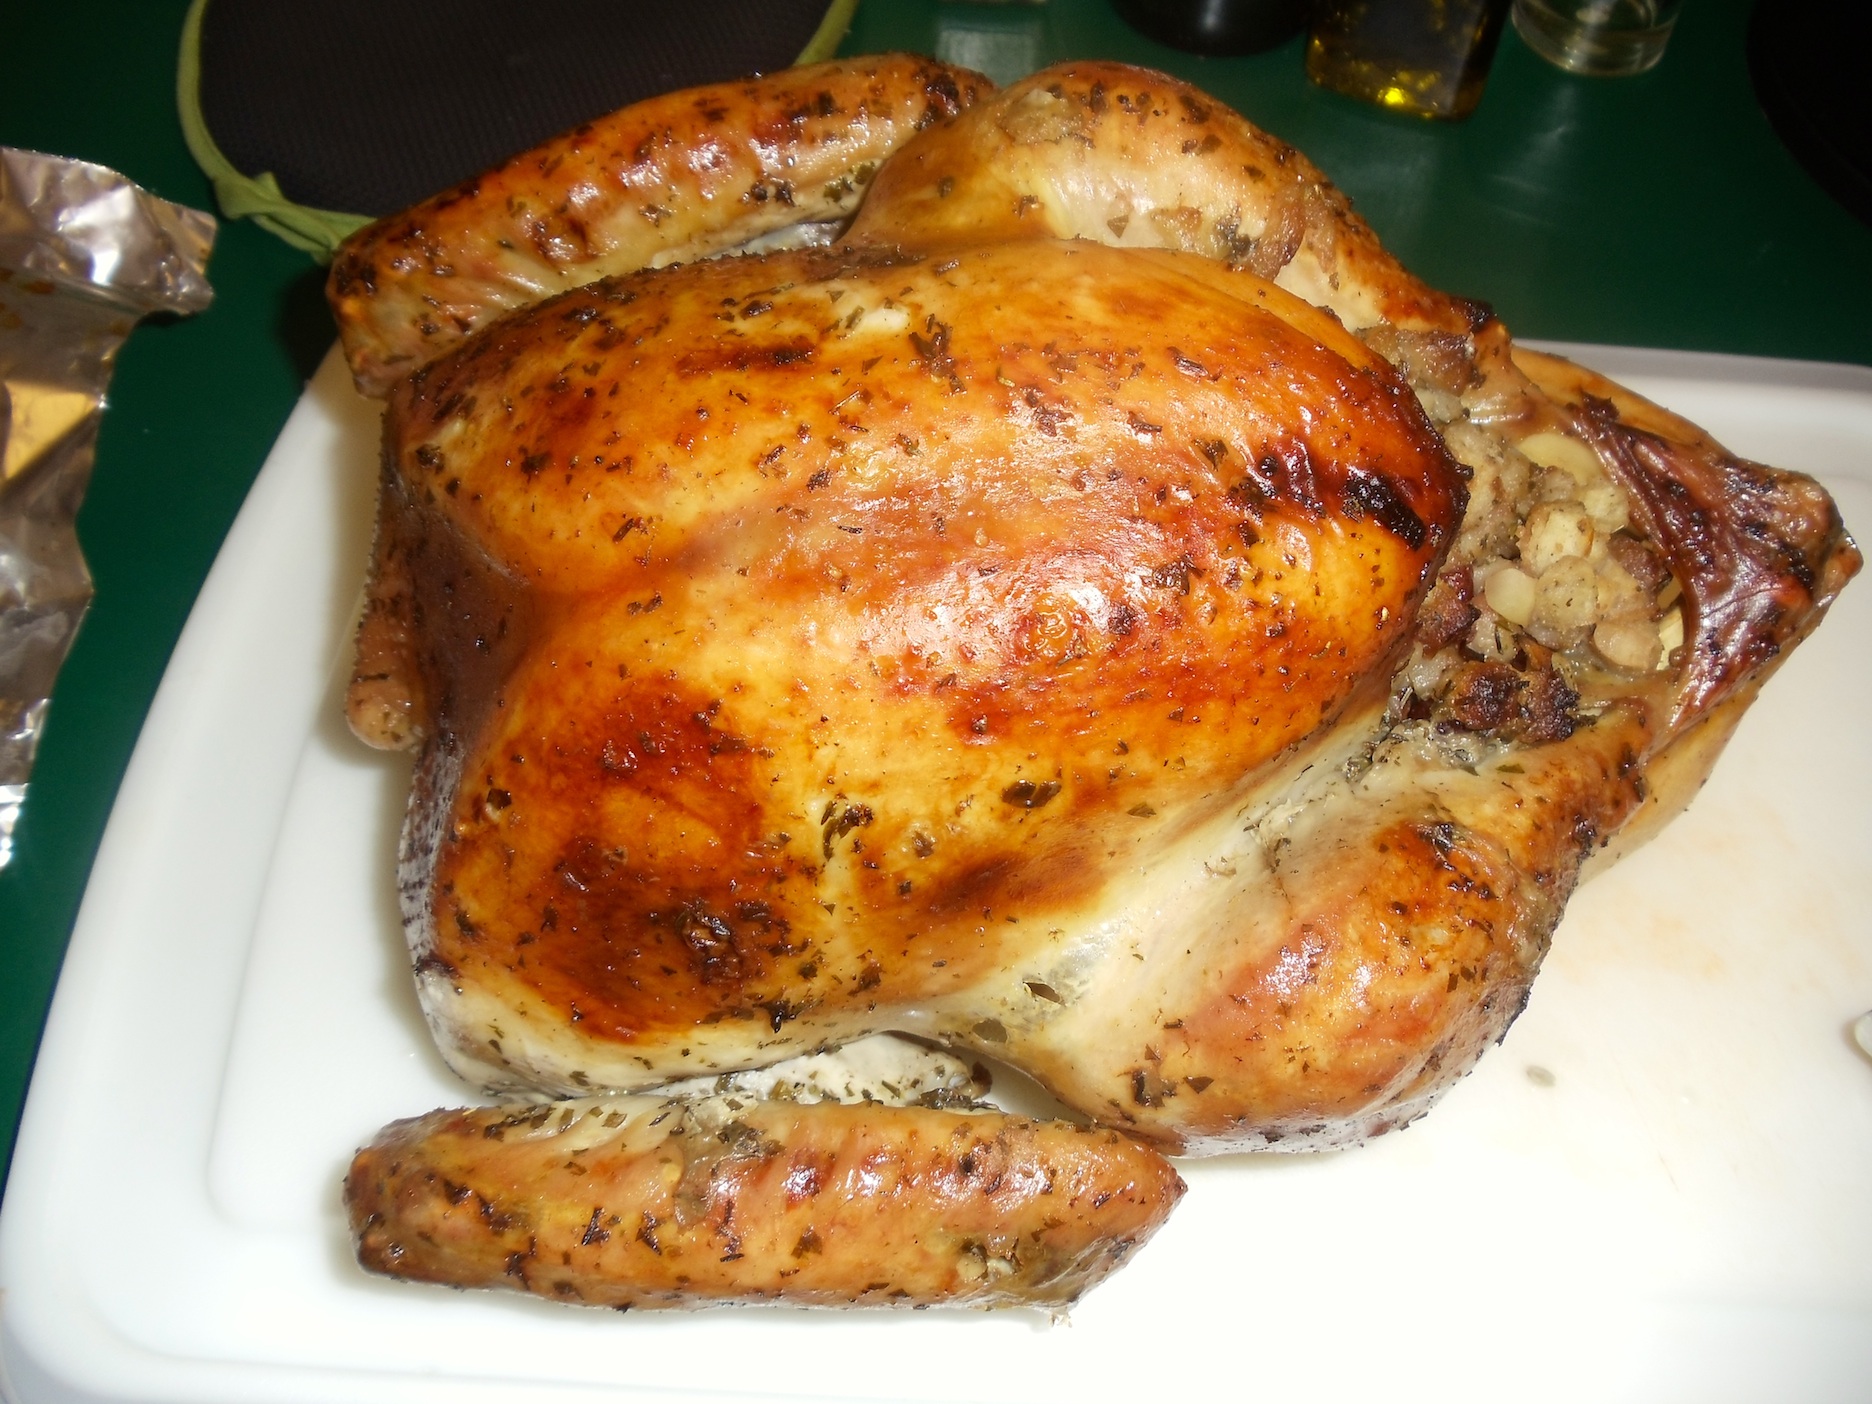 Serve my Turkey during the holidays and people will have turkey envy. No lie! This is a no fail, herb filled, juicy turkey. Real Food Girl: Unmodified